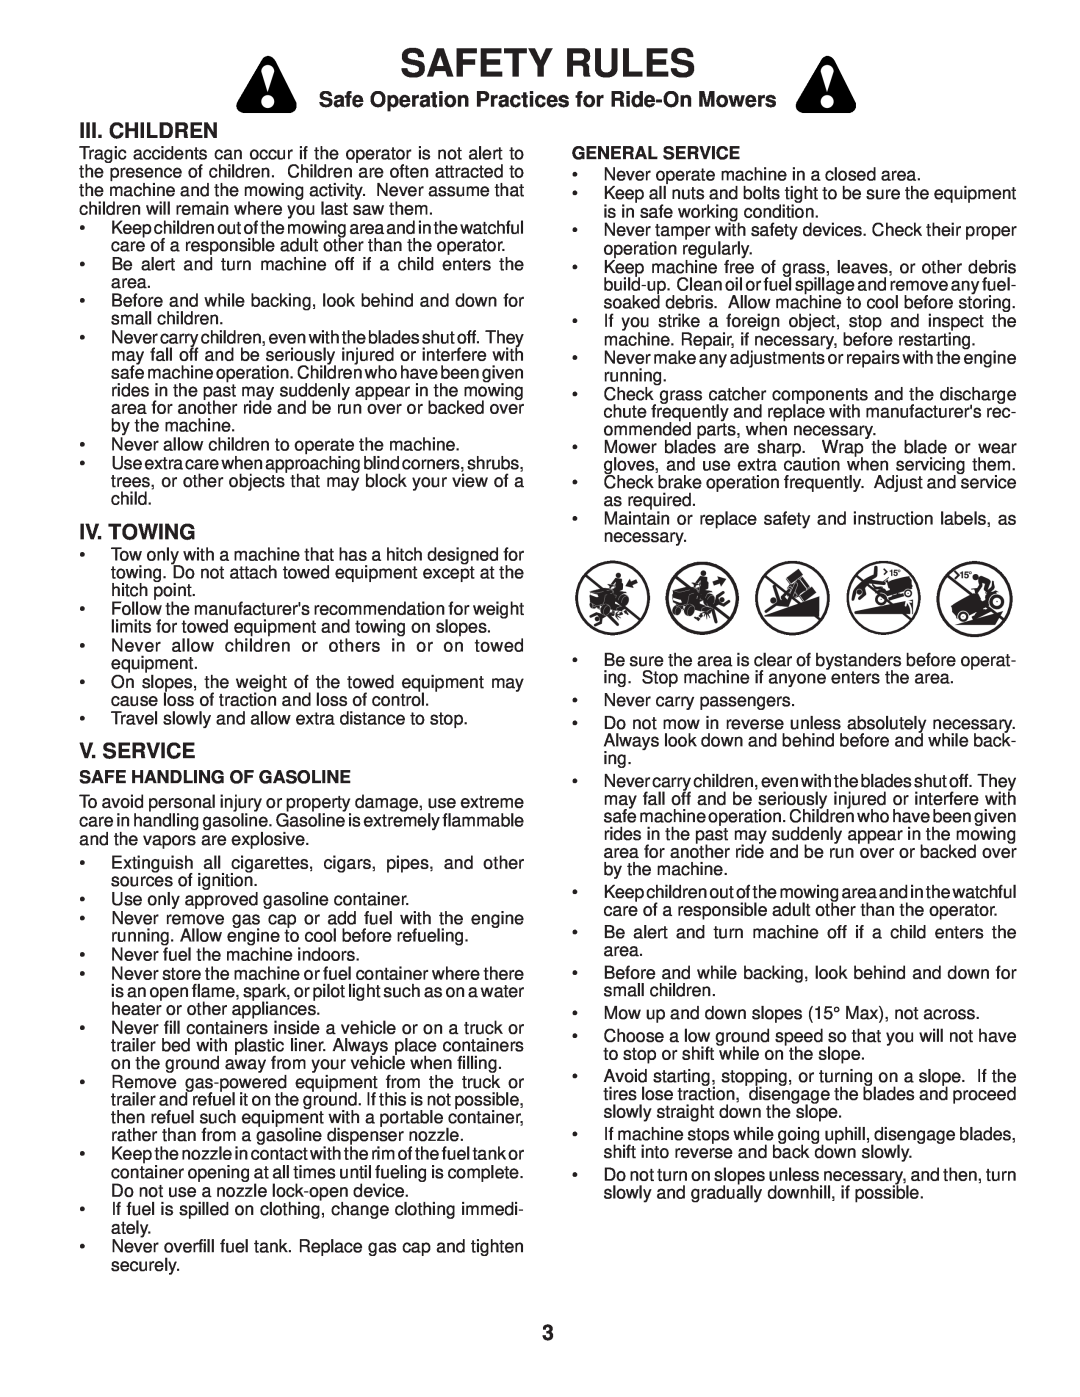 Husqvarna 960430120 Iii. Children, Iv. Towing, V. Service, Safety Rules, Safe Operation Practices for Ride-OnMowers 